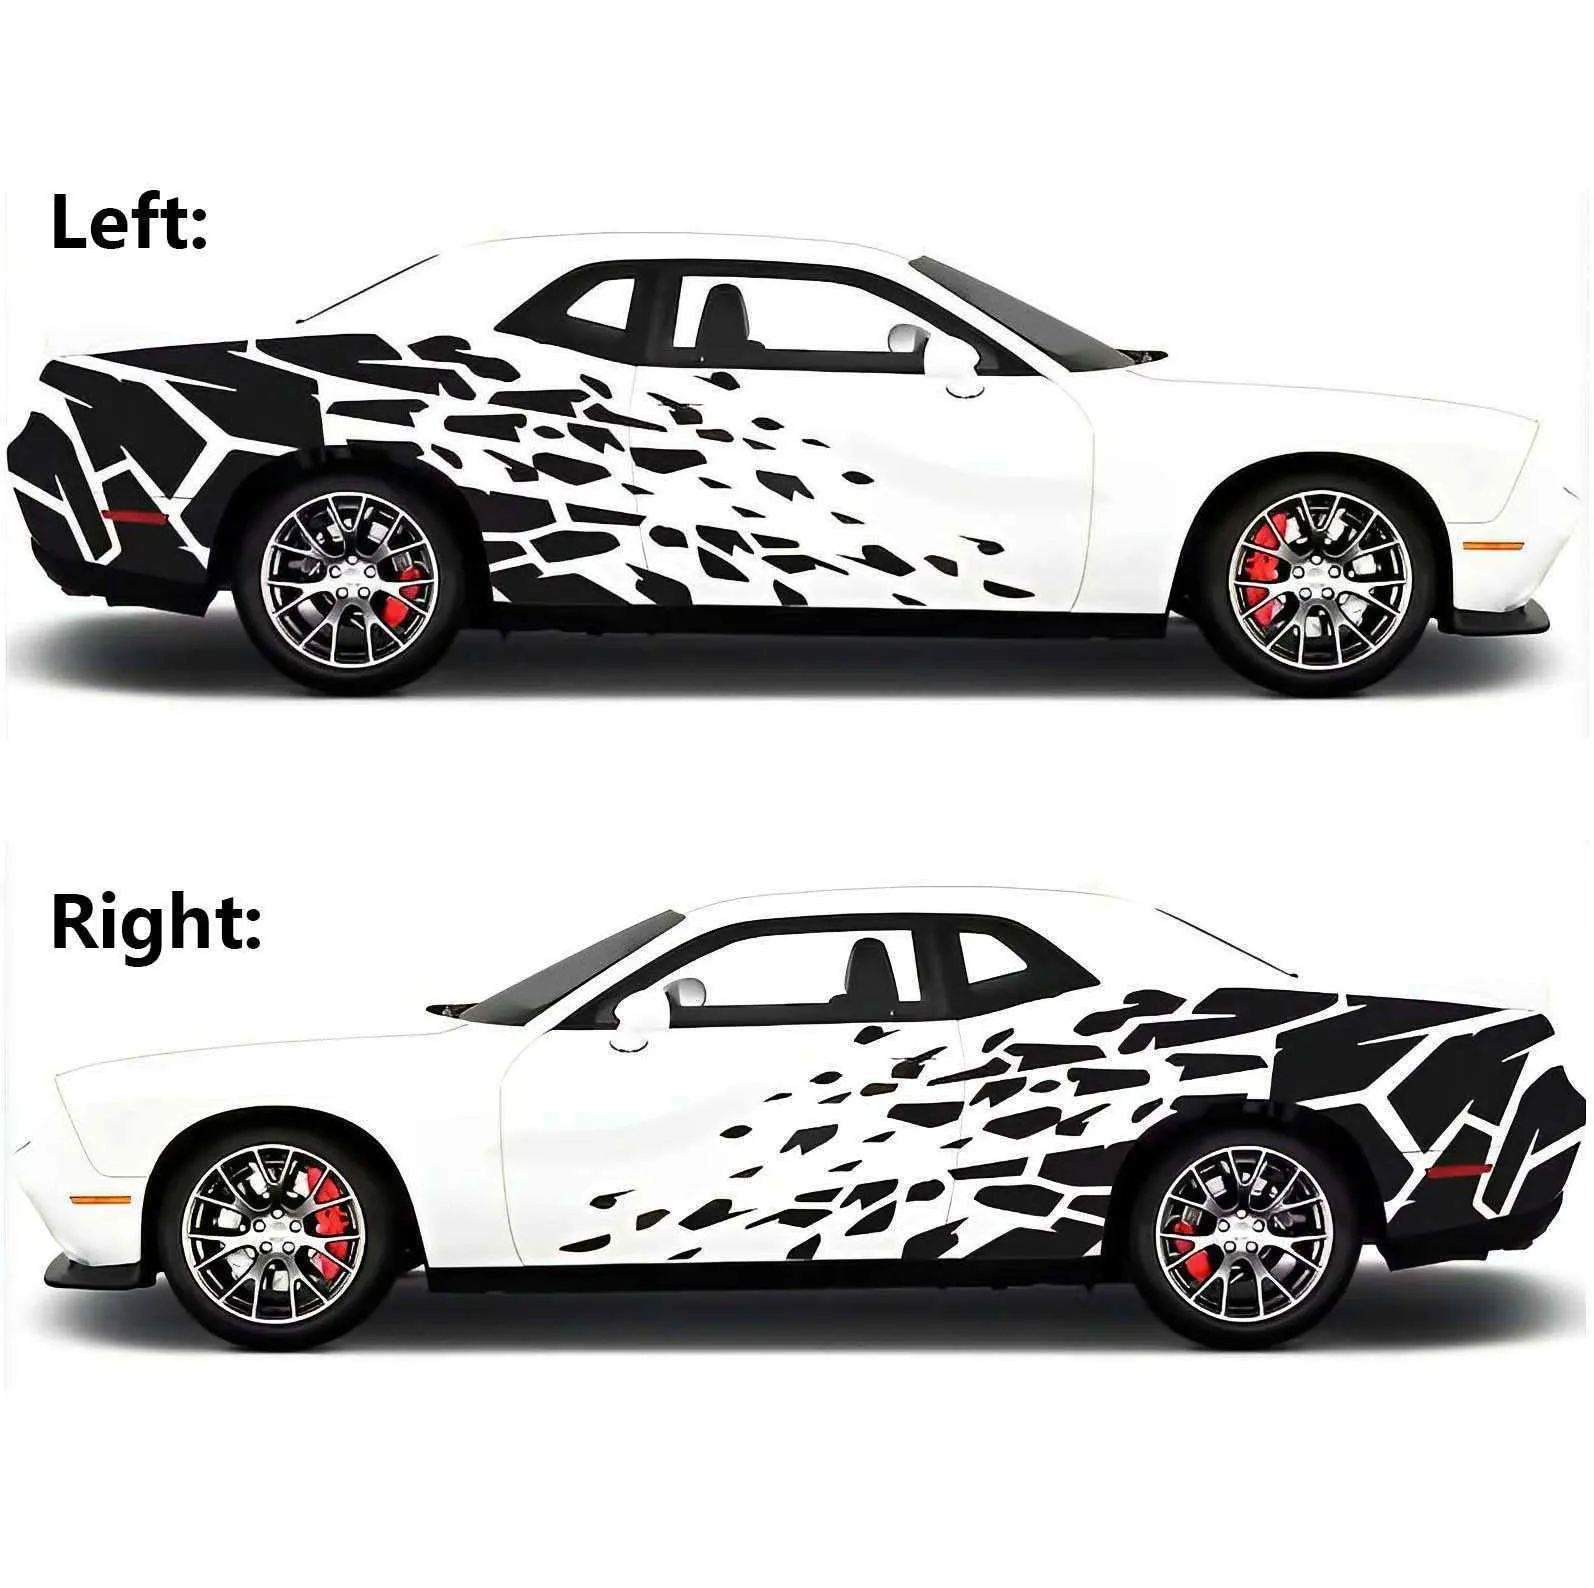 Rear Fender Top Car Outdoor Sports Racing Stickers Graphic Design